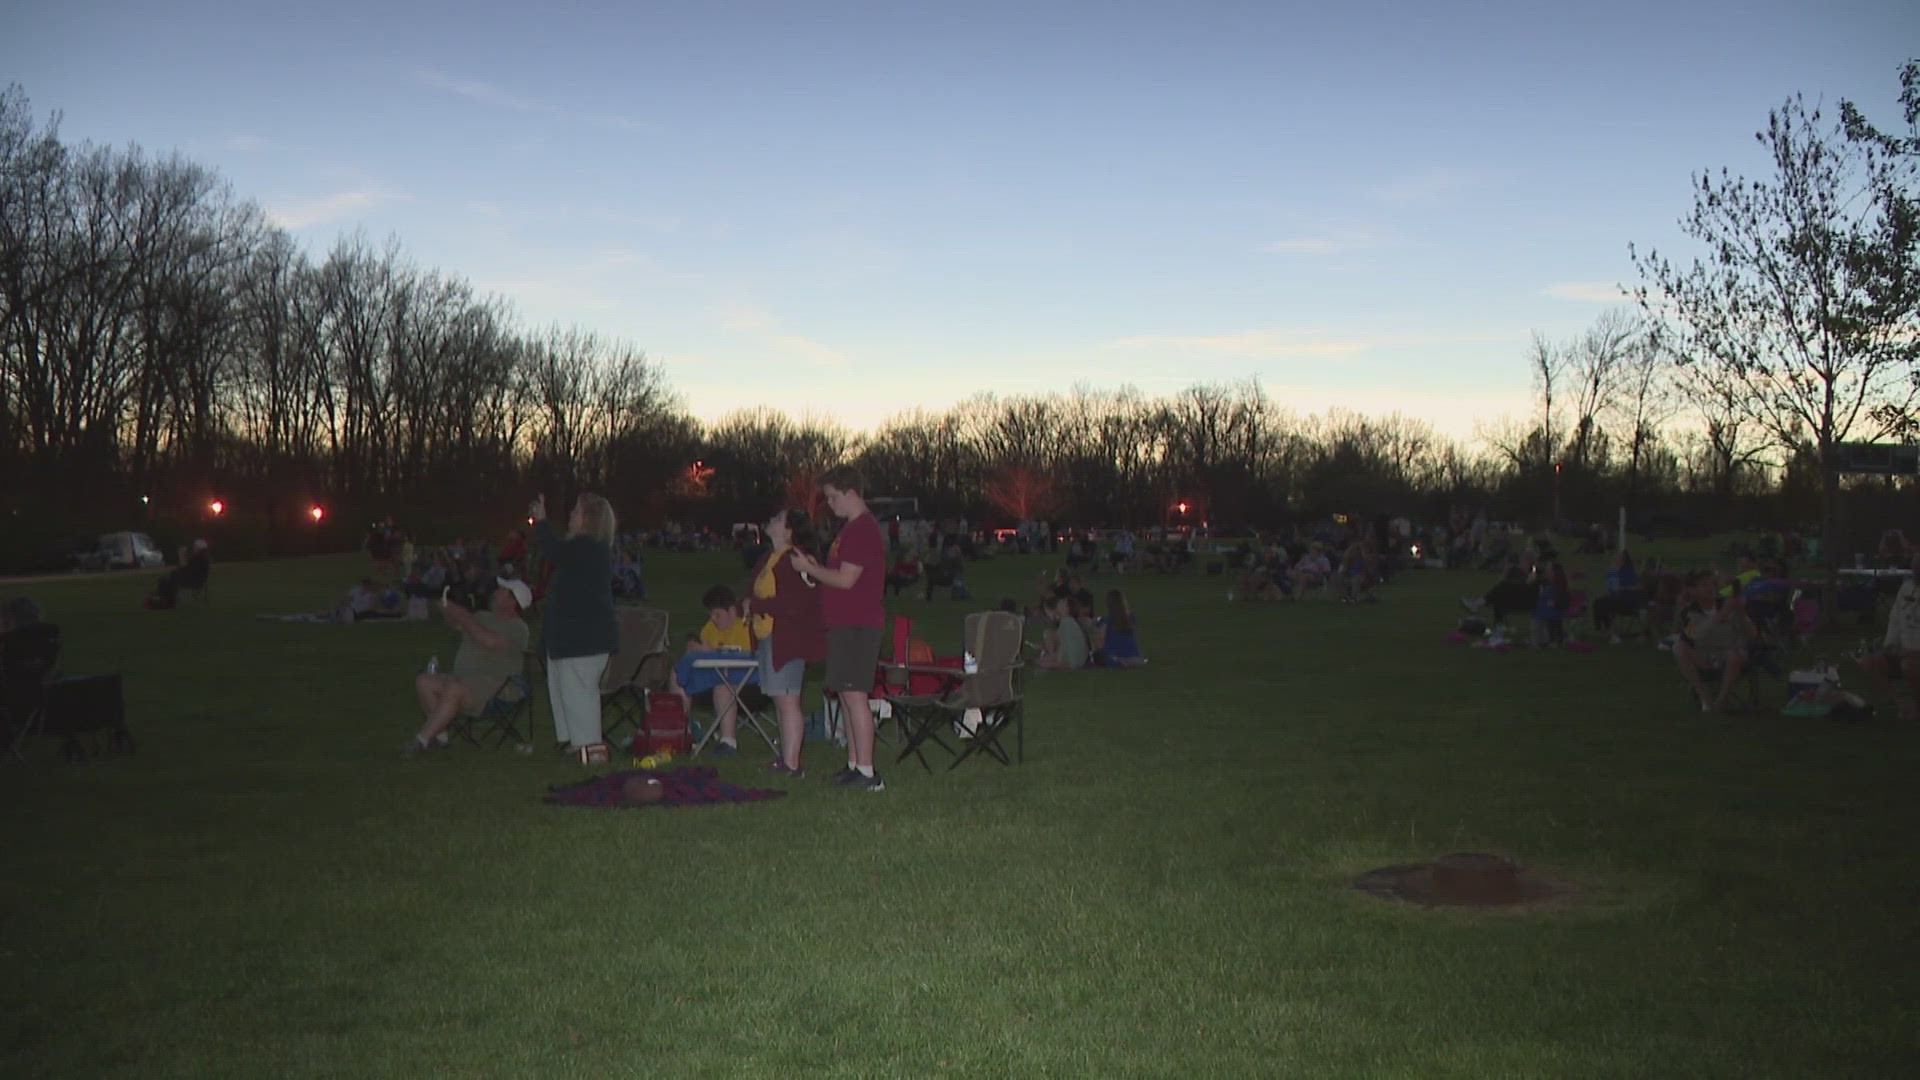 Farmington's eclipse watch party drew in people from all over the country and world. About 4,000 visitors came into the community.